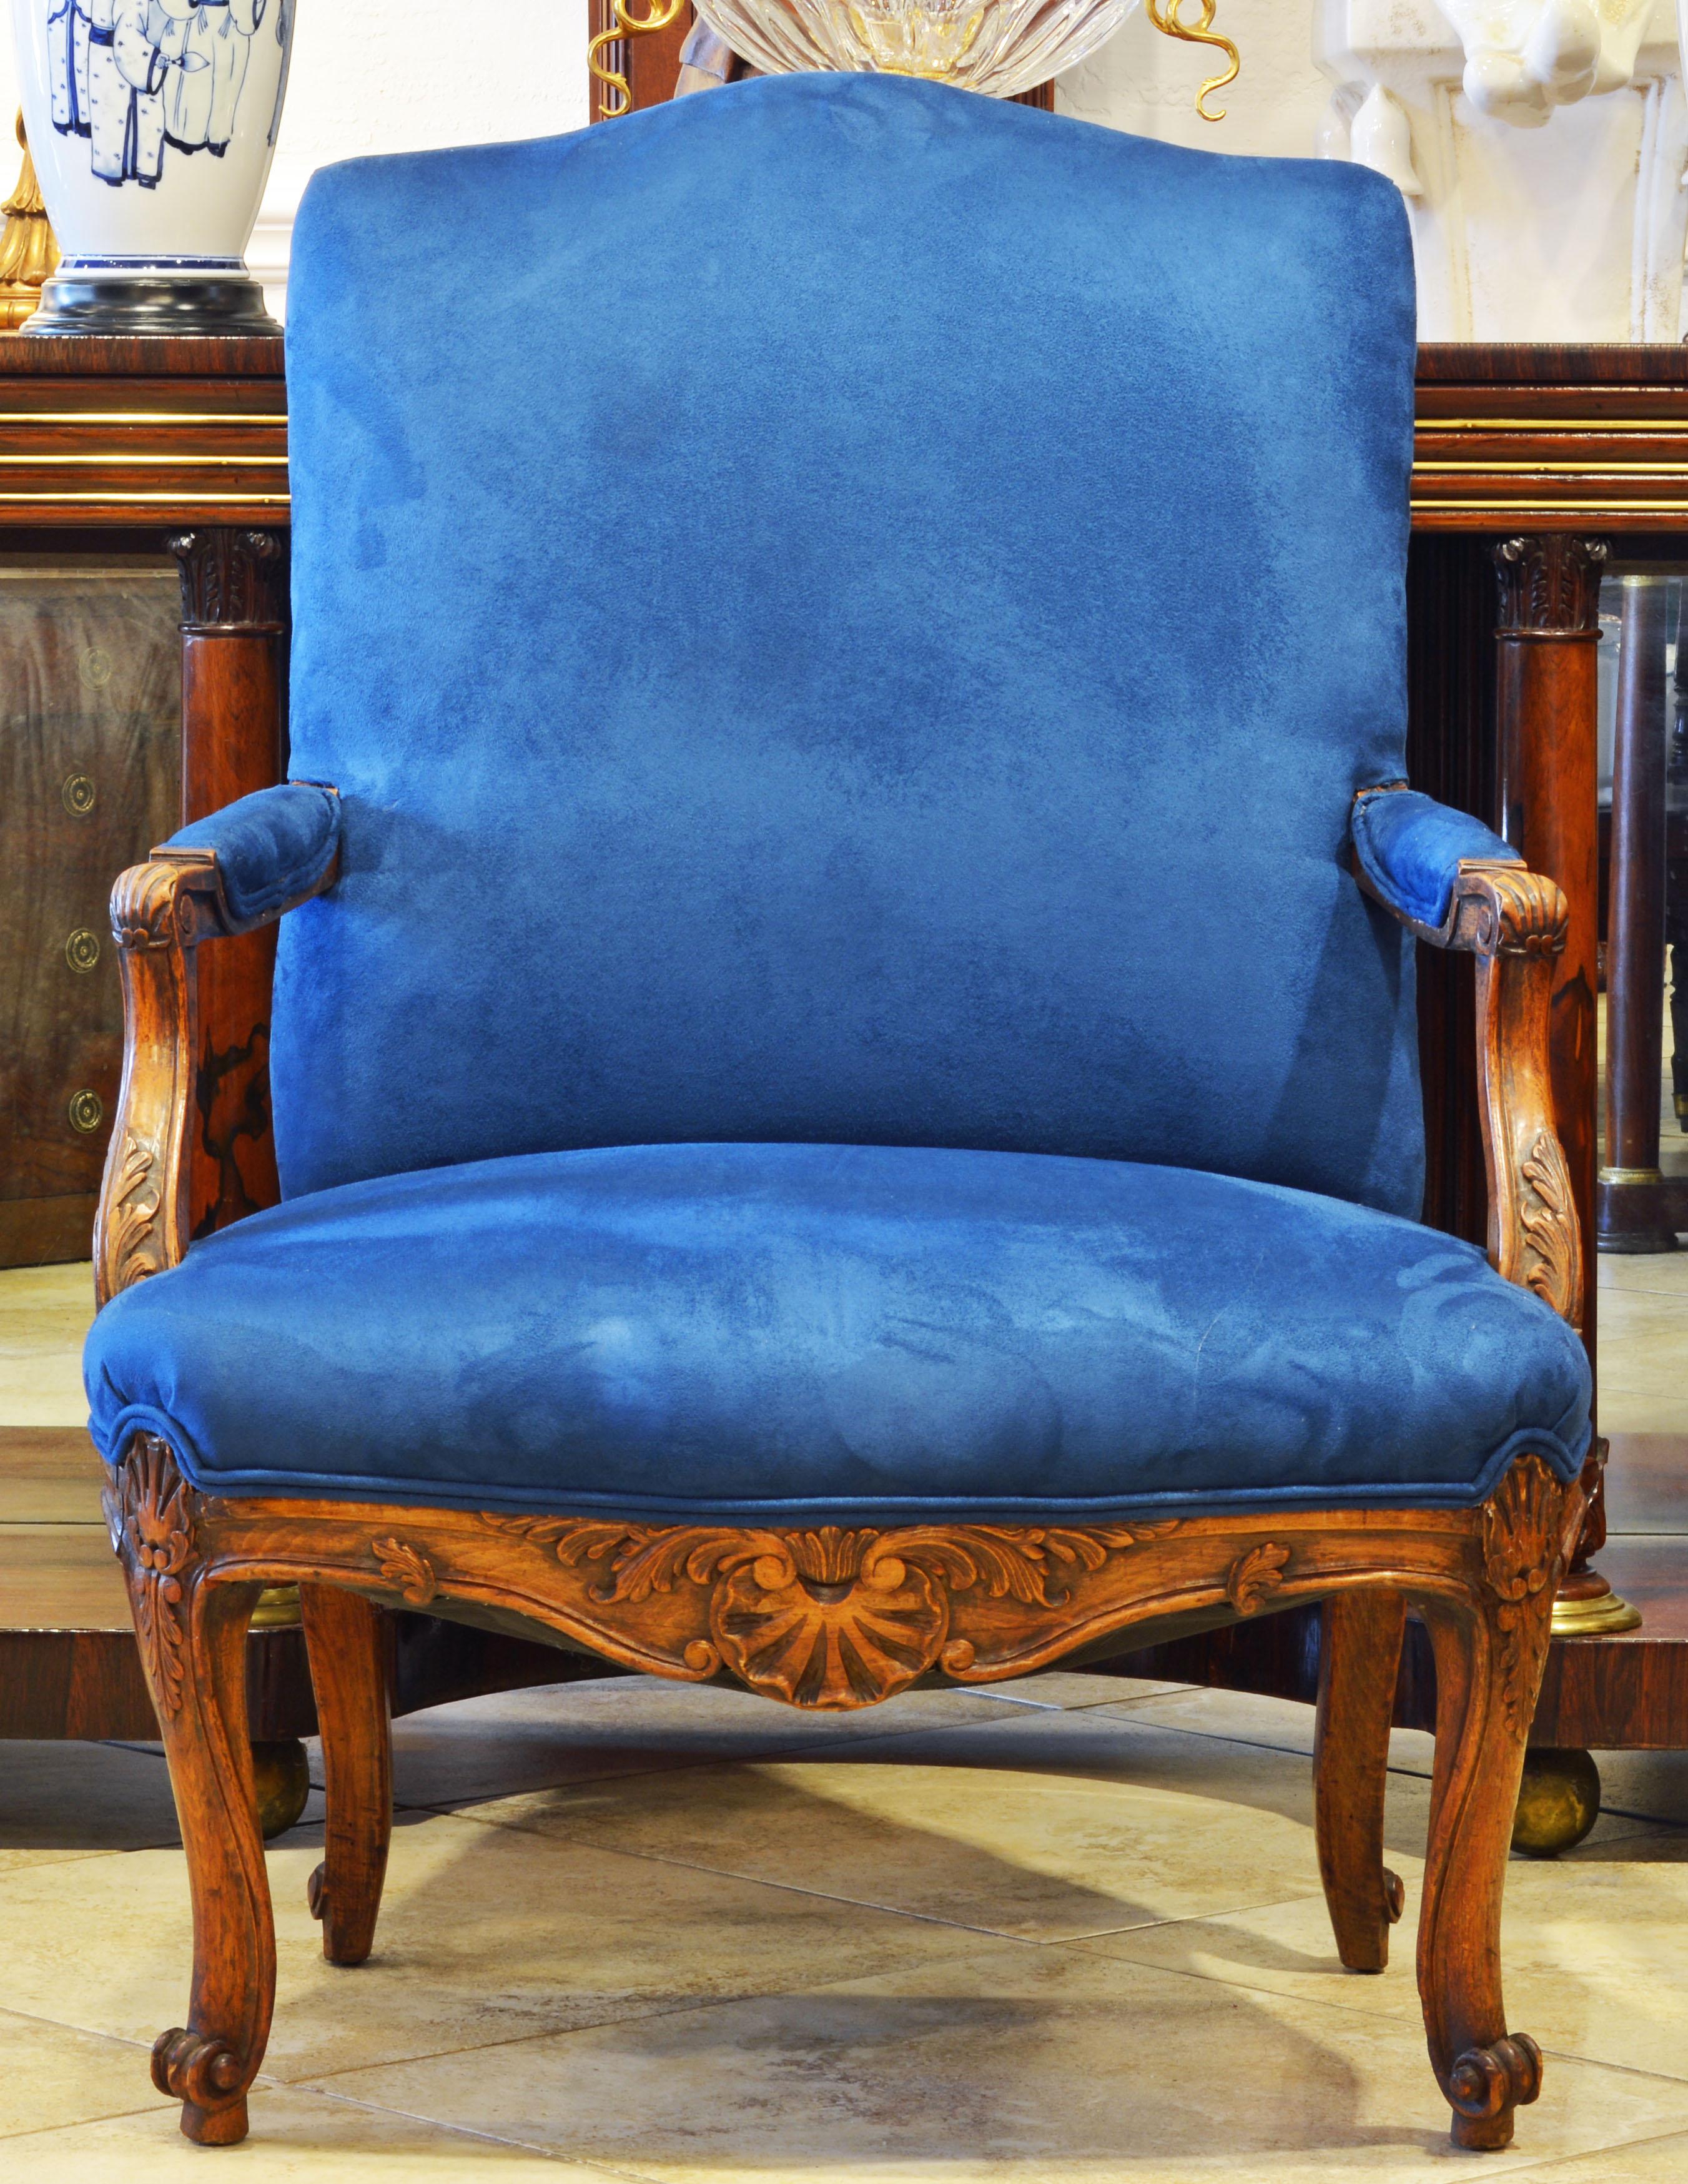 Of generous proportions these 19th century French Provincial armchairs feature carved armrests, elaborately carved and shaped aprons and carved cabriole legs all fashioned in the style of Louis XV. They are recently reupholstered and covered in an